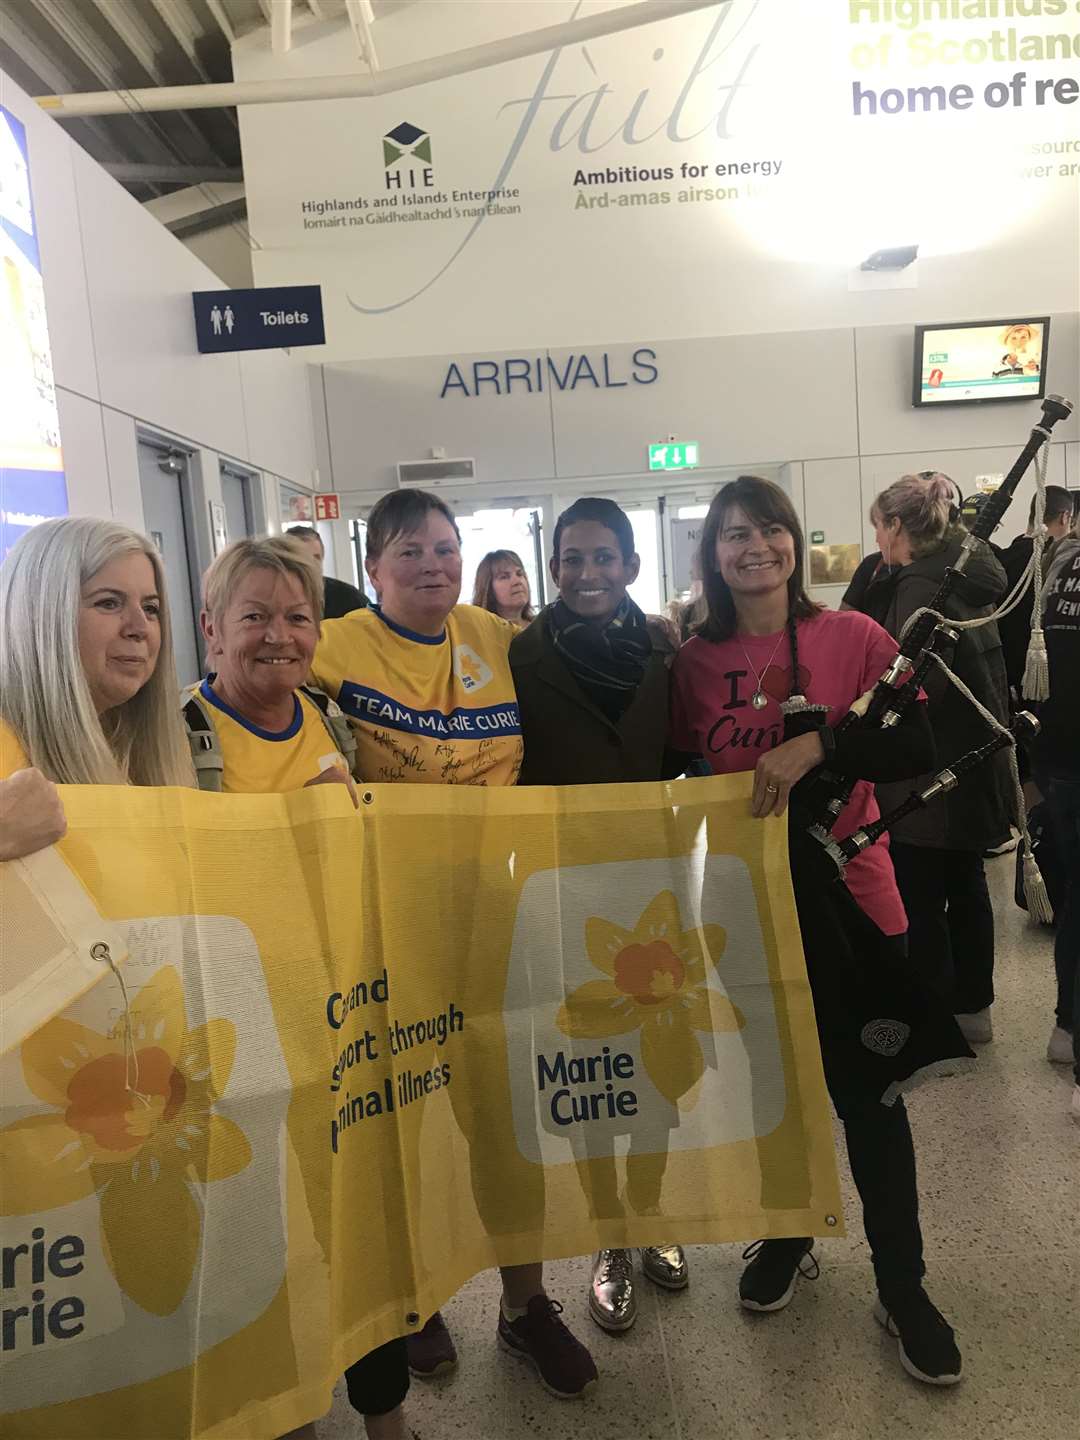 Anne (second left) bumped into the TV presenter Naga Munchetty (second right) as she arrived back at Inverness Airport.